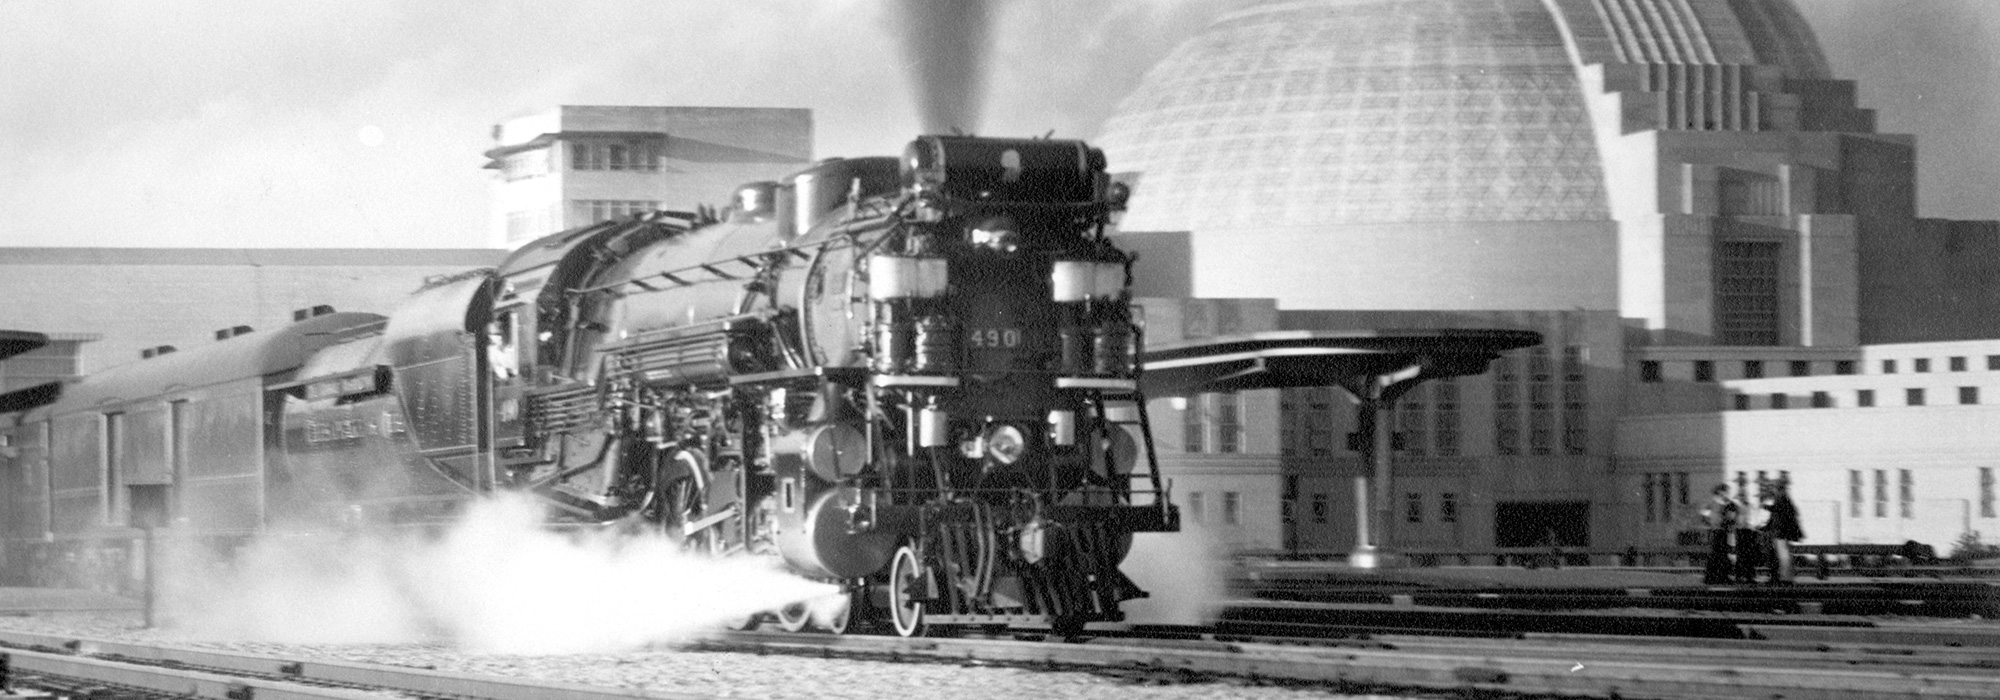 historic image of a train at union terminal